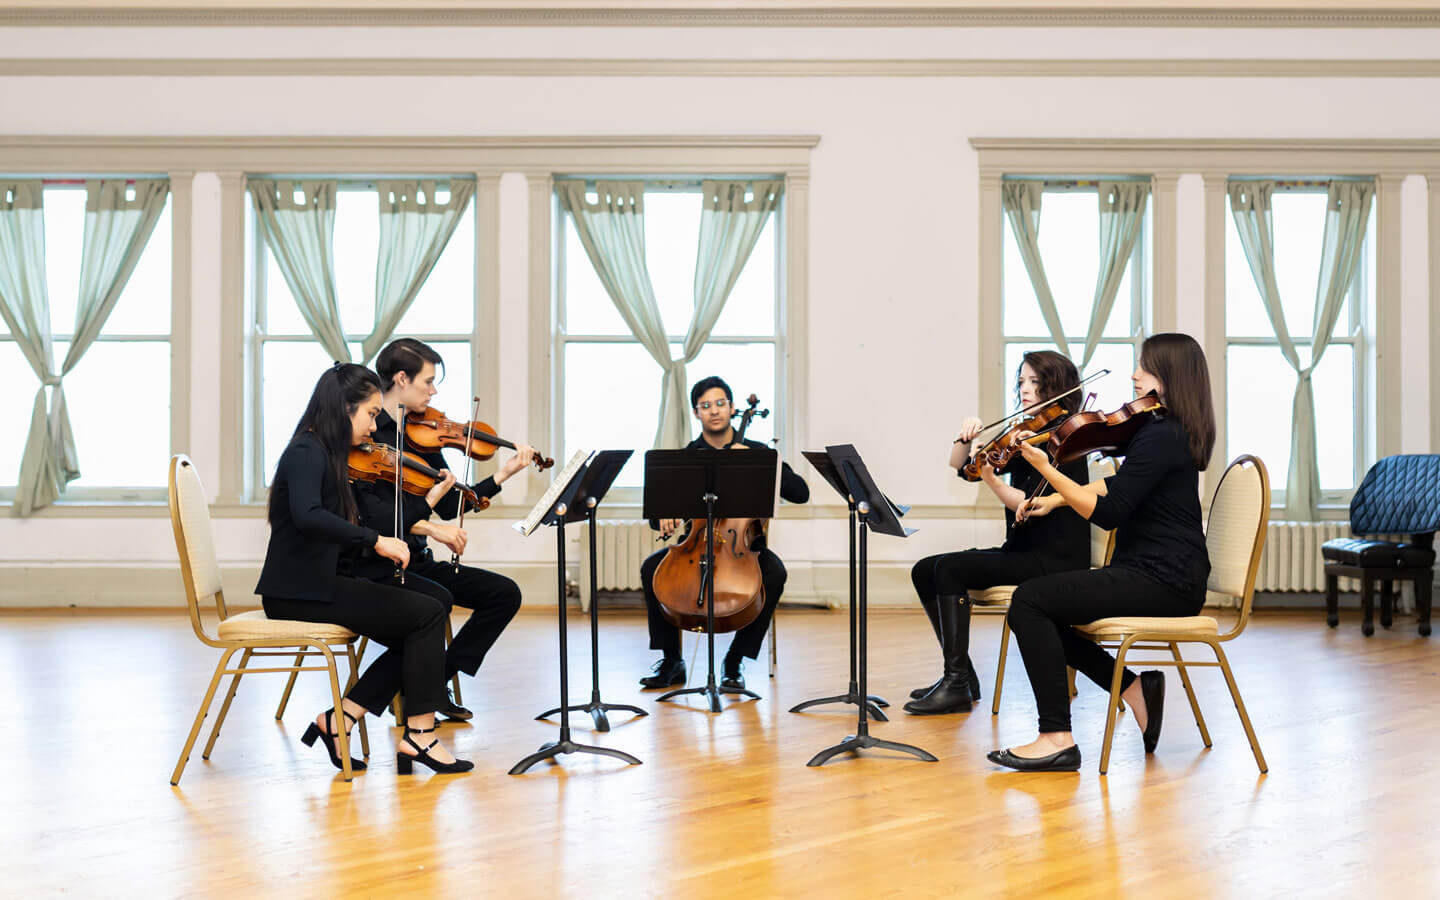 String quintet performing at a recital in a well-lit room full of natural lighting